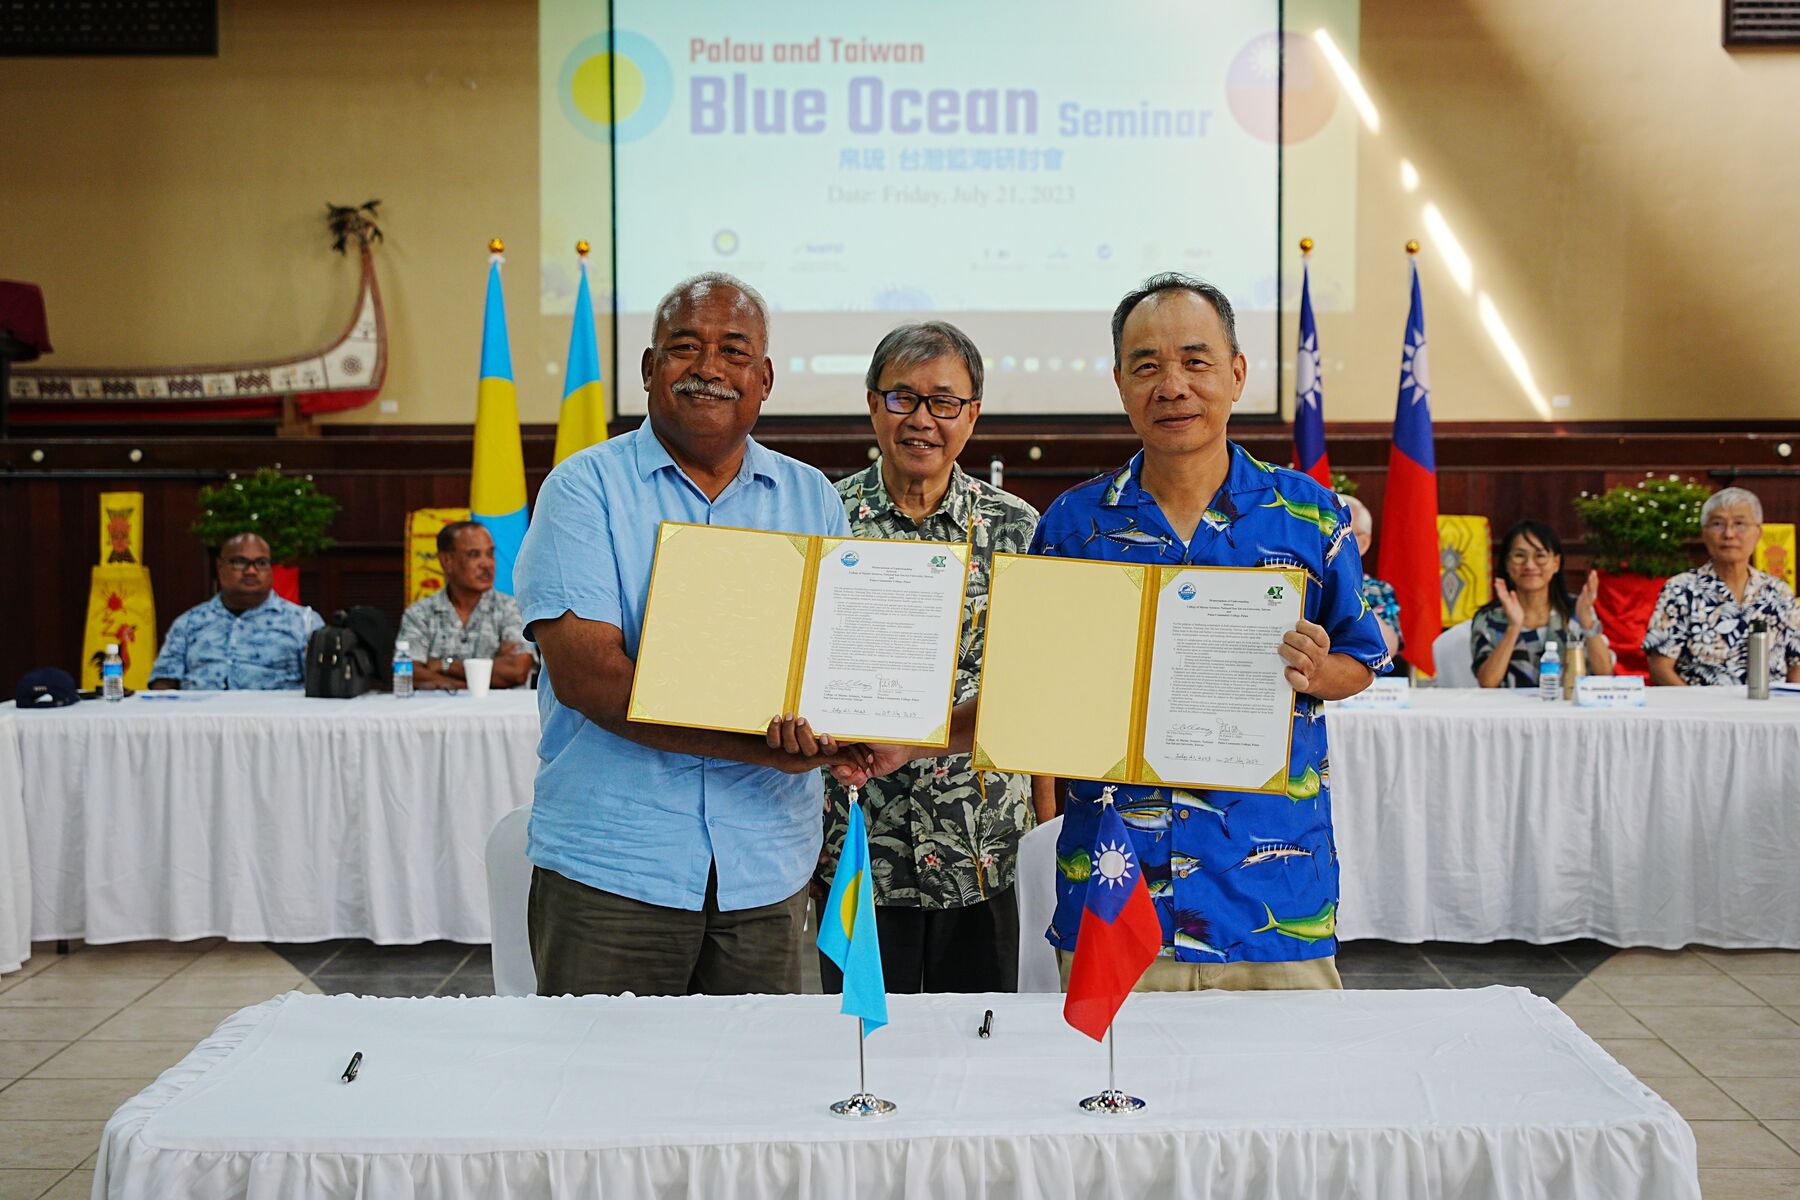 Chin-Chang Hung, the Dean of NSYSU’s College of Marine Sciences (first from the right in the photo), representing NSYSU, signed the MOU with Dr. Patrick Tellei (first from left photo) of Palau Community College in July